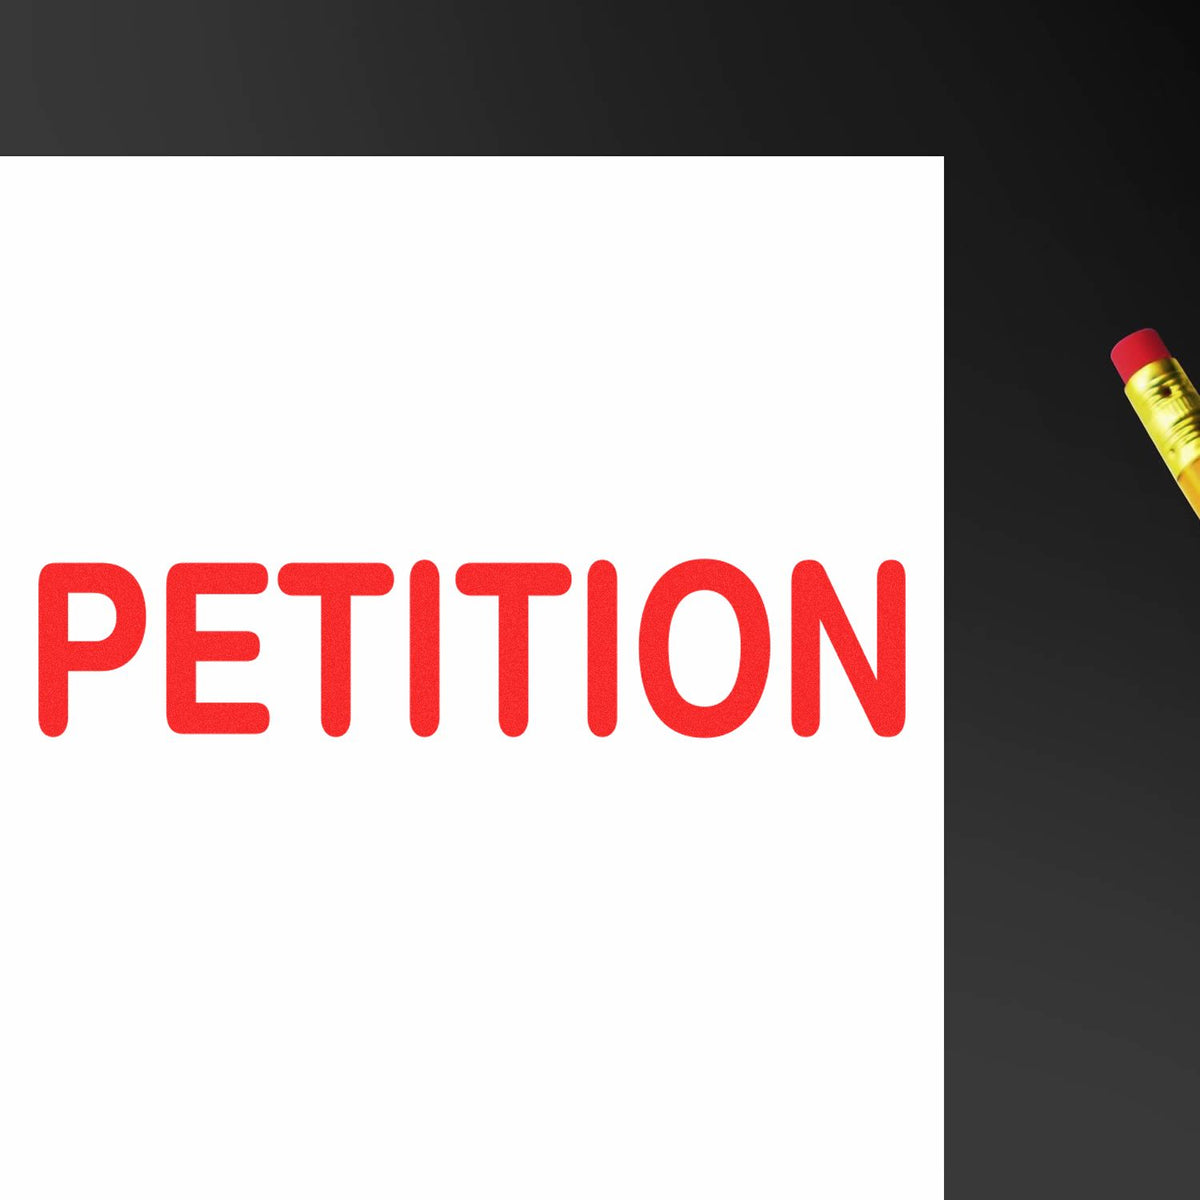 Petition Rubber Stamp In Use Photo